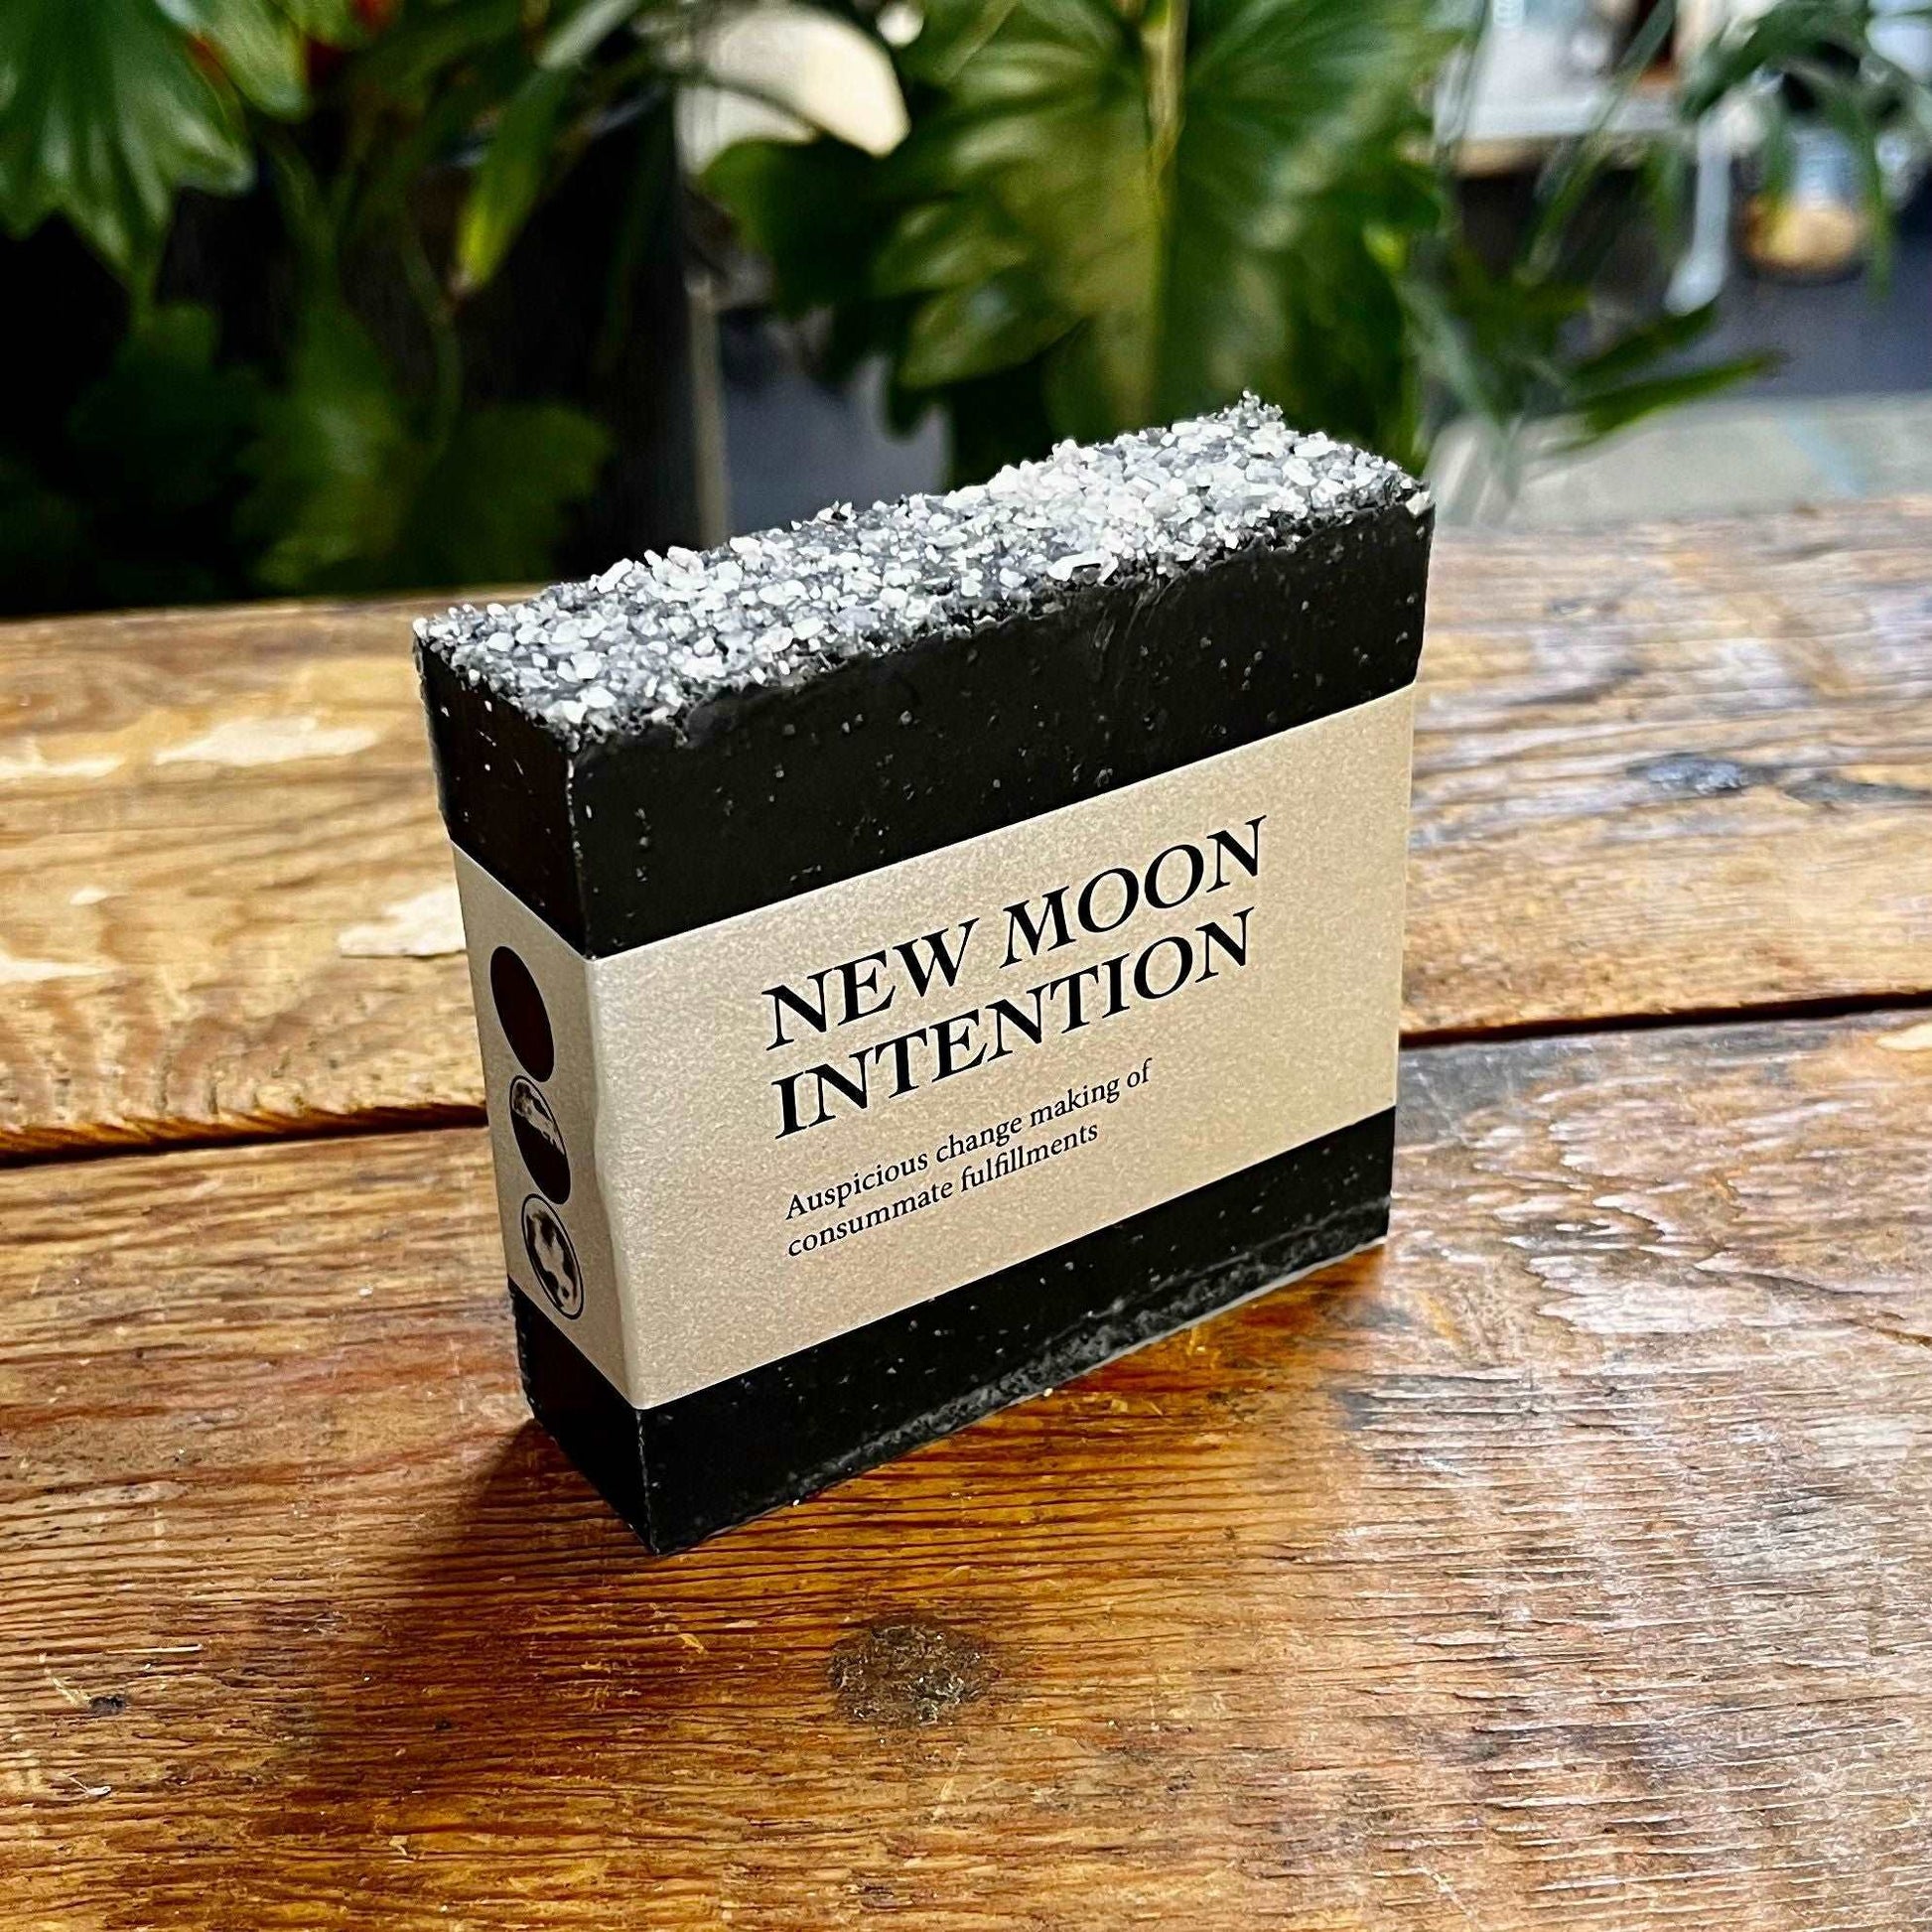 Handmade Cold Pressed Goat's Milk Soap with Local Colorado Goat's Milk - Charcoal New Moon Intention Soap with Organic Essential Oils of Rosemary, Tea Tree, and Mint for Clarifying and Refreshing Skin, Topped with Salt for Exfoliation and Rejuvenation